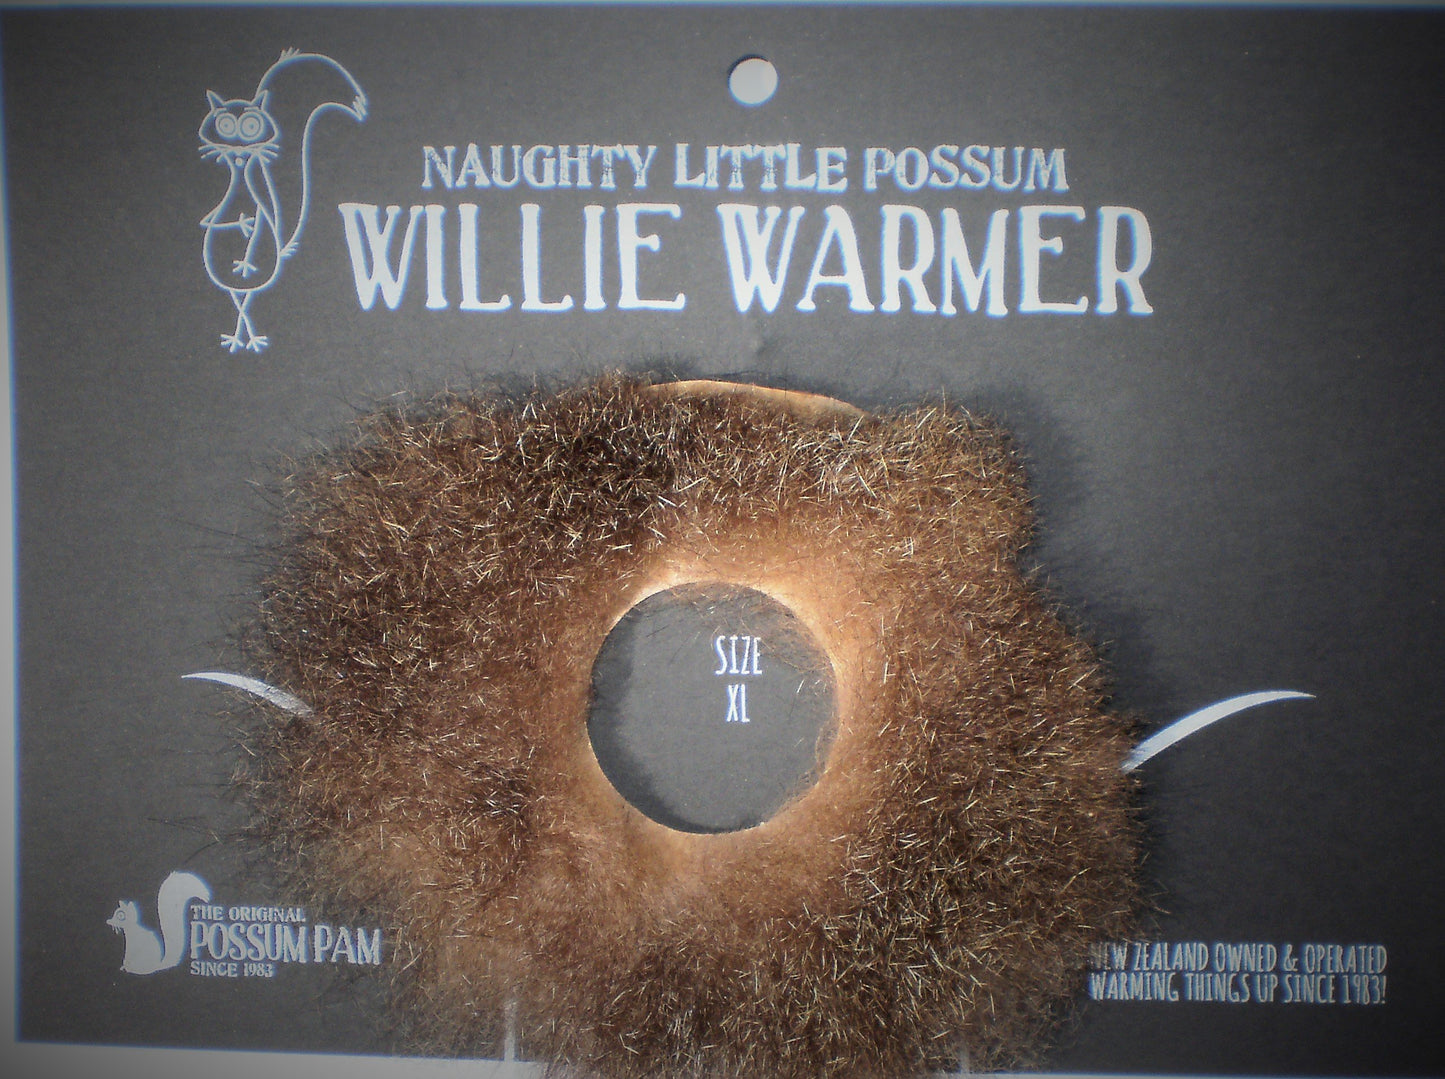 WILLIE WARMER - Woolshed Gallery